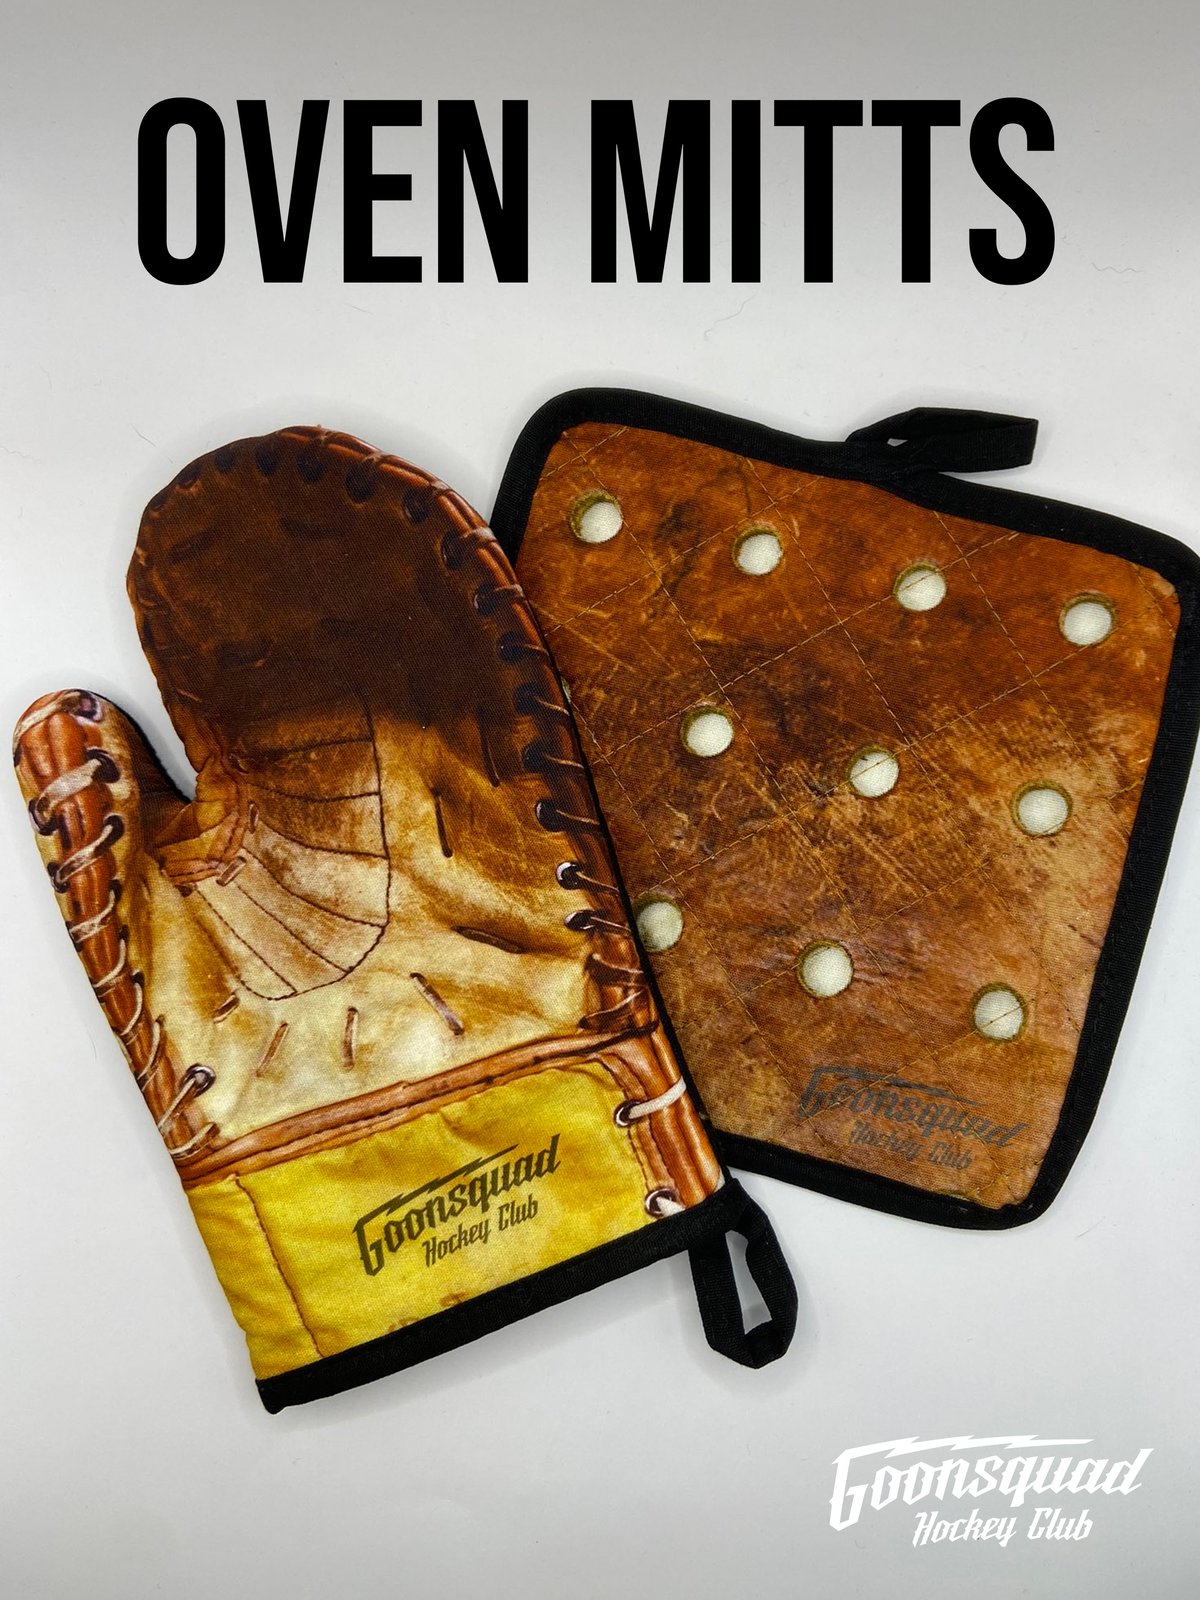 https://assets.bigcartel.com/product_images/349023412/Oven-mitts.jpg?auto=format&fit=max&w=1200